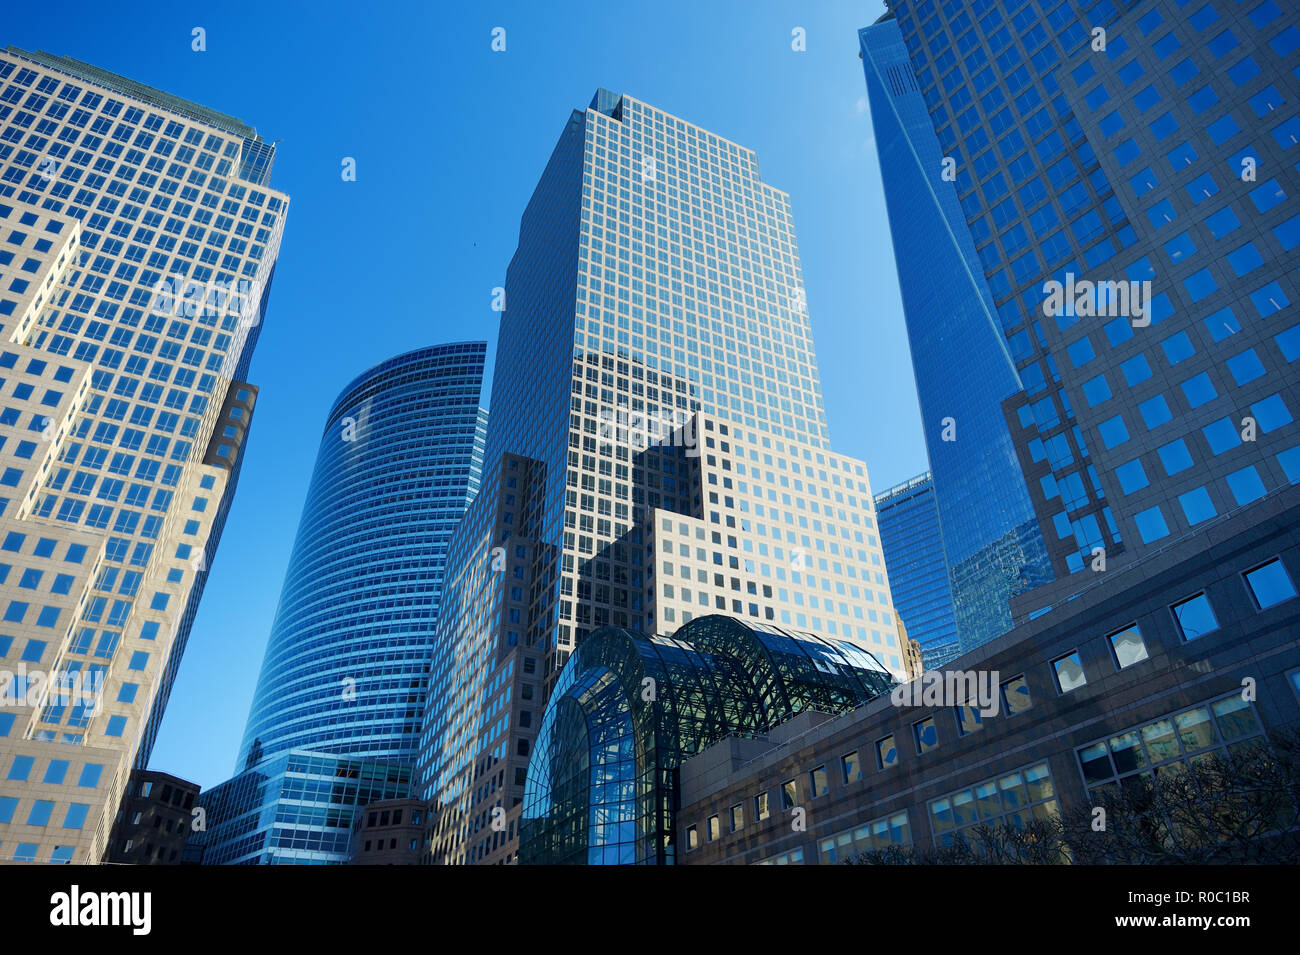 NEW YORK - MARCH 22, 2015: Brookfield Place, still referred to as the World Financial Center, located in the Battery Park City neighborhood of Manhatt Stock Photo